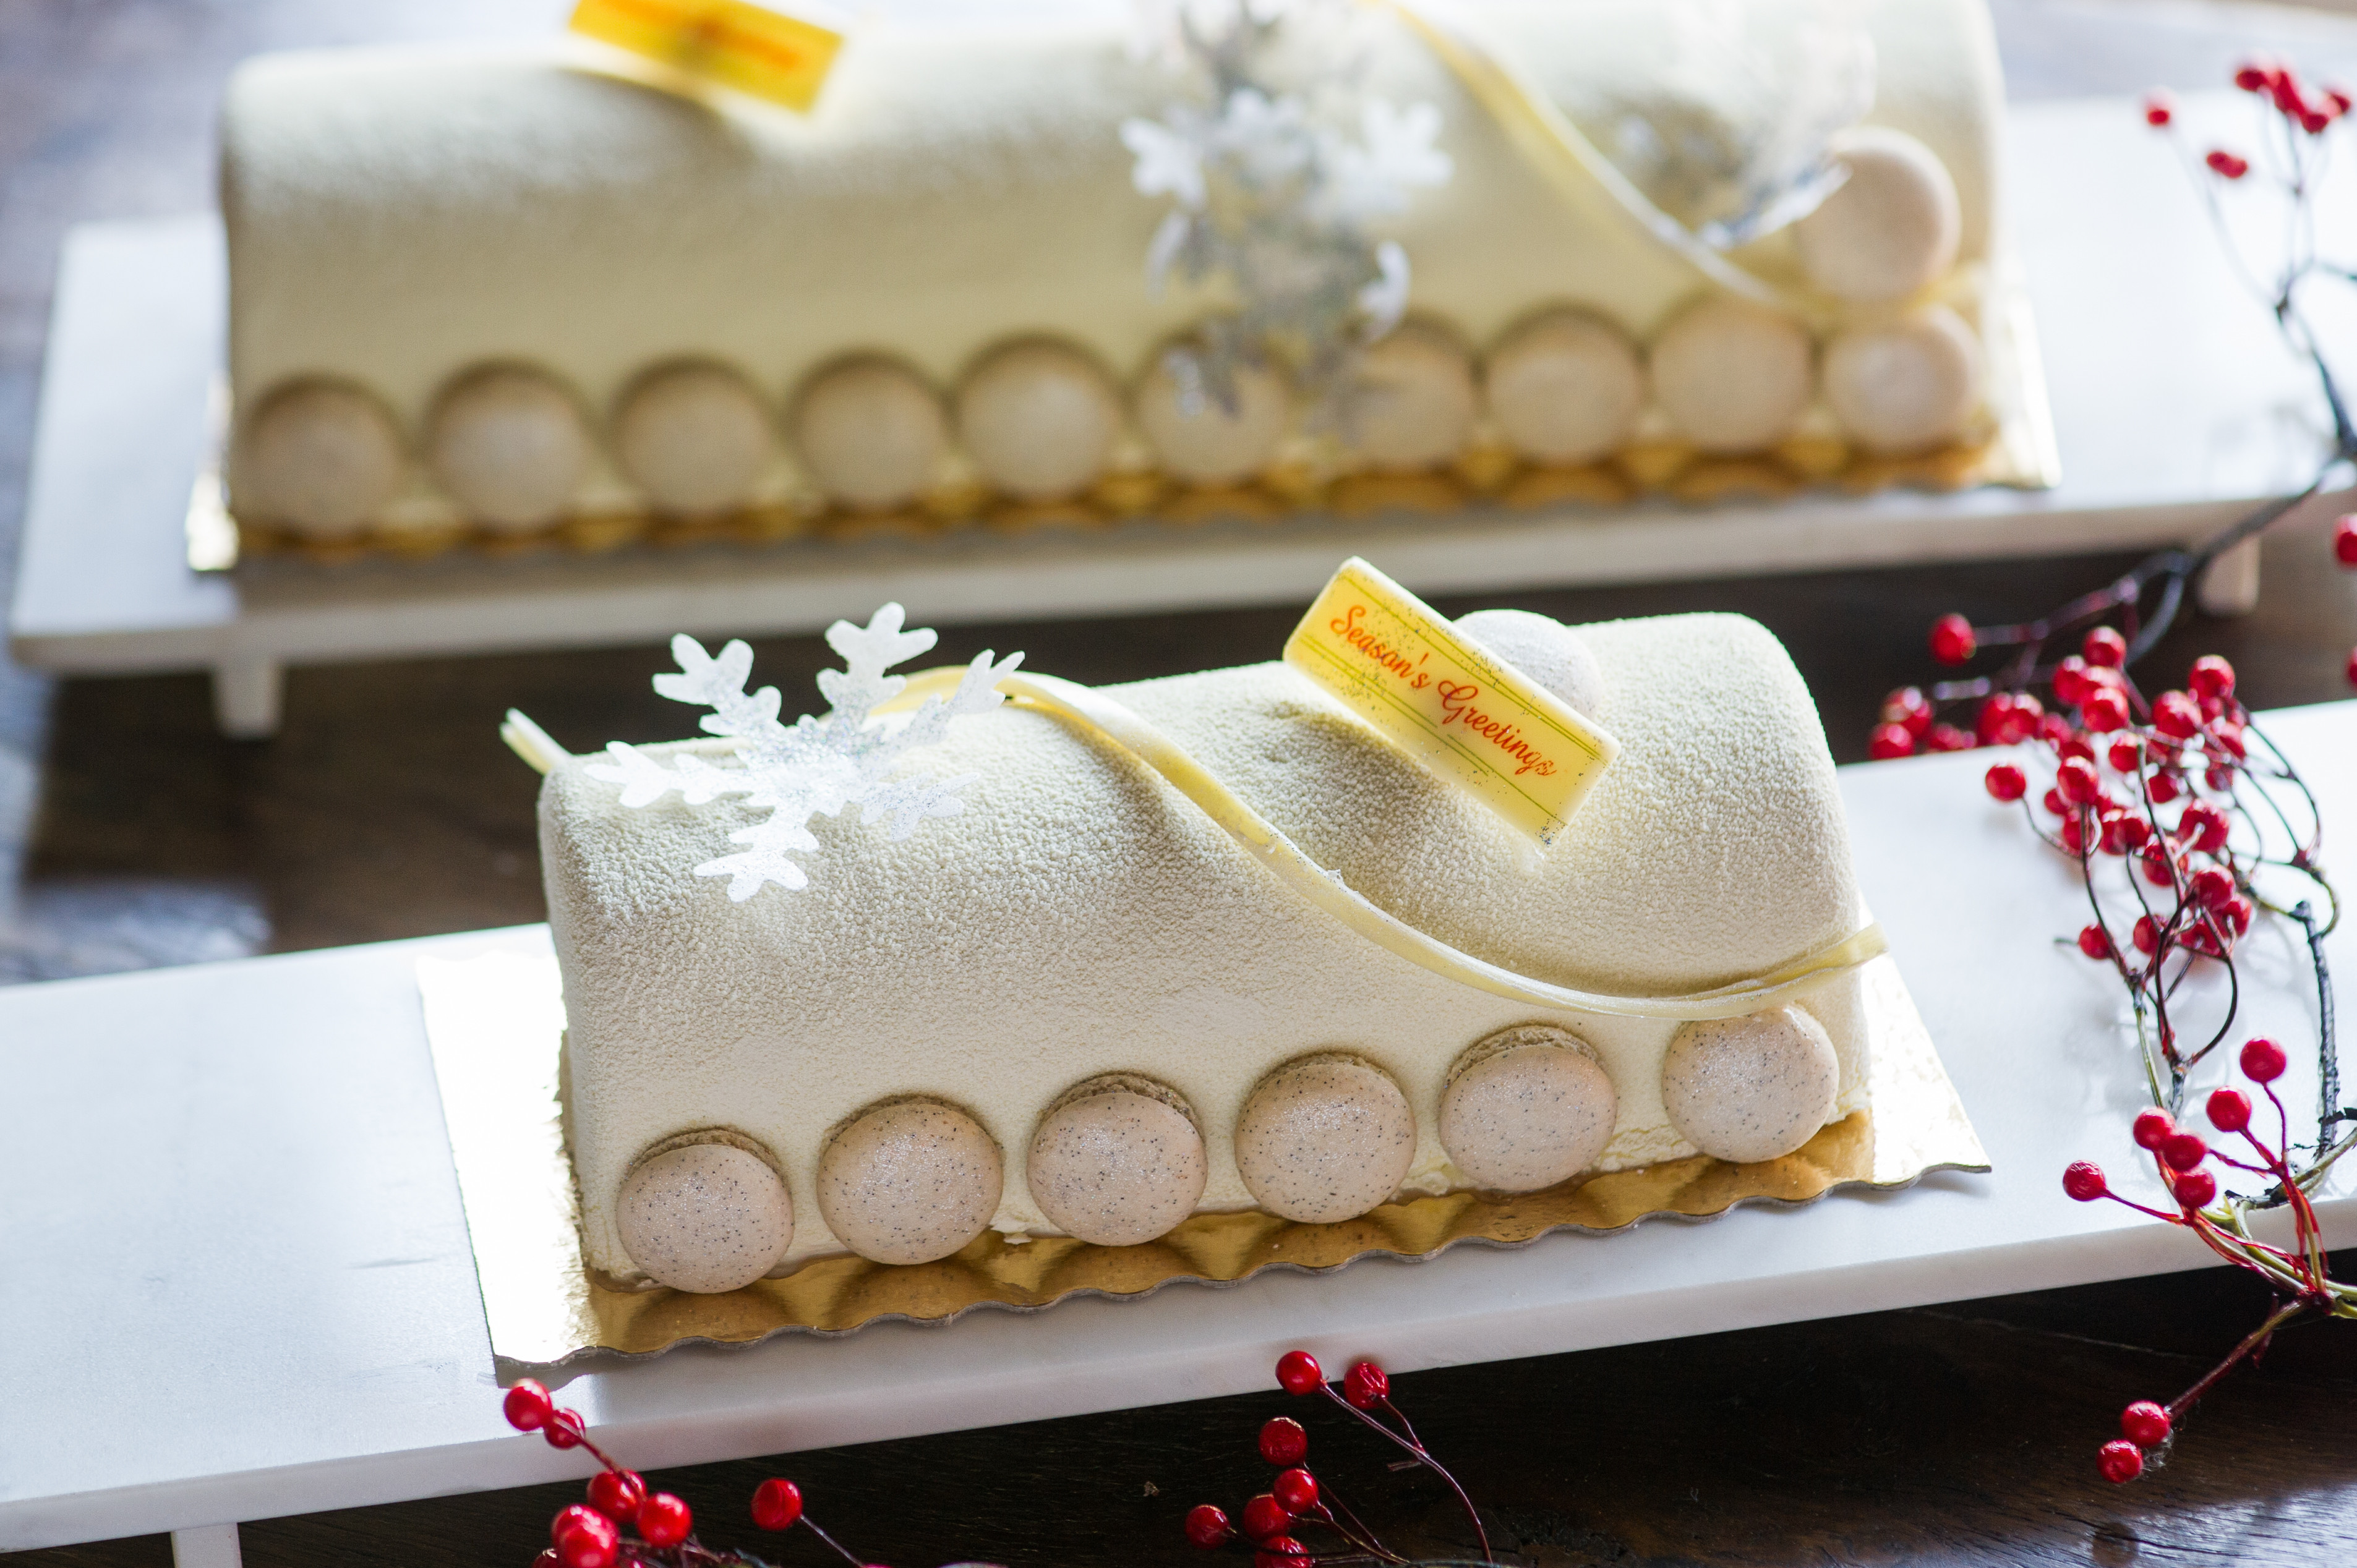 Cool Christmas Desserts
 Best Unique Holiday Desserts in LA